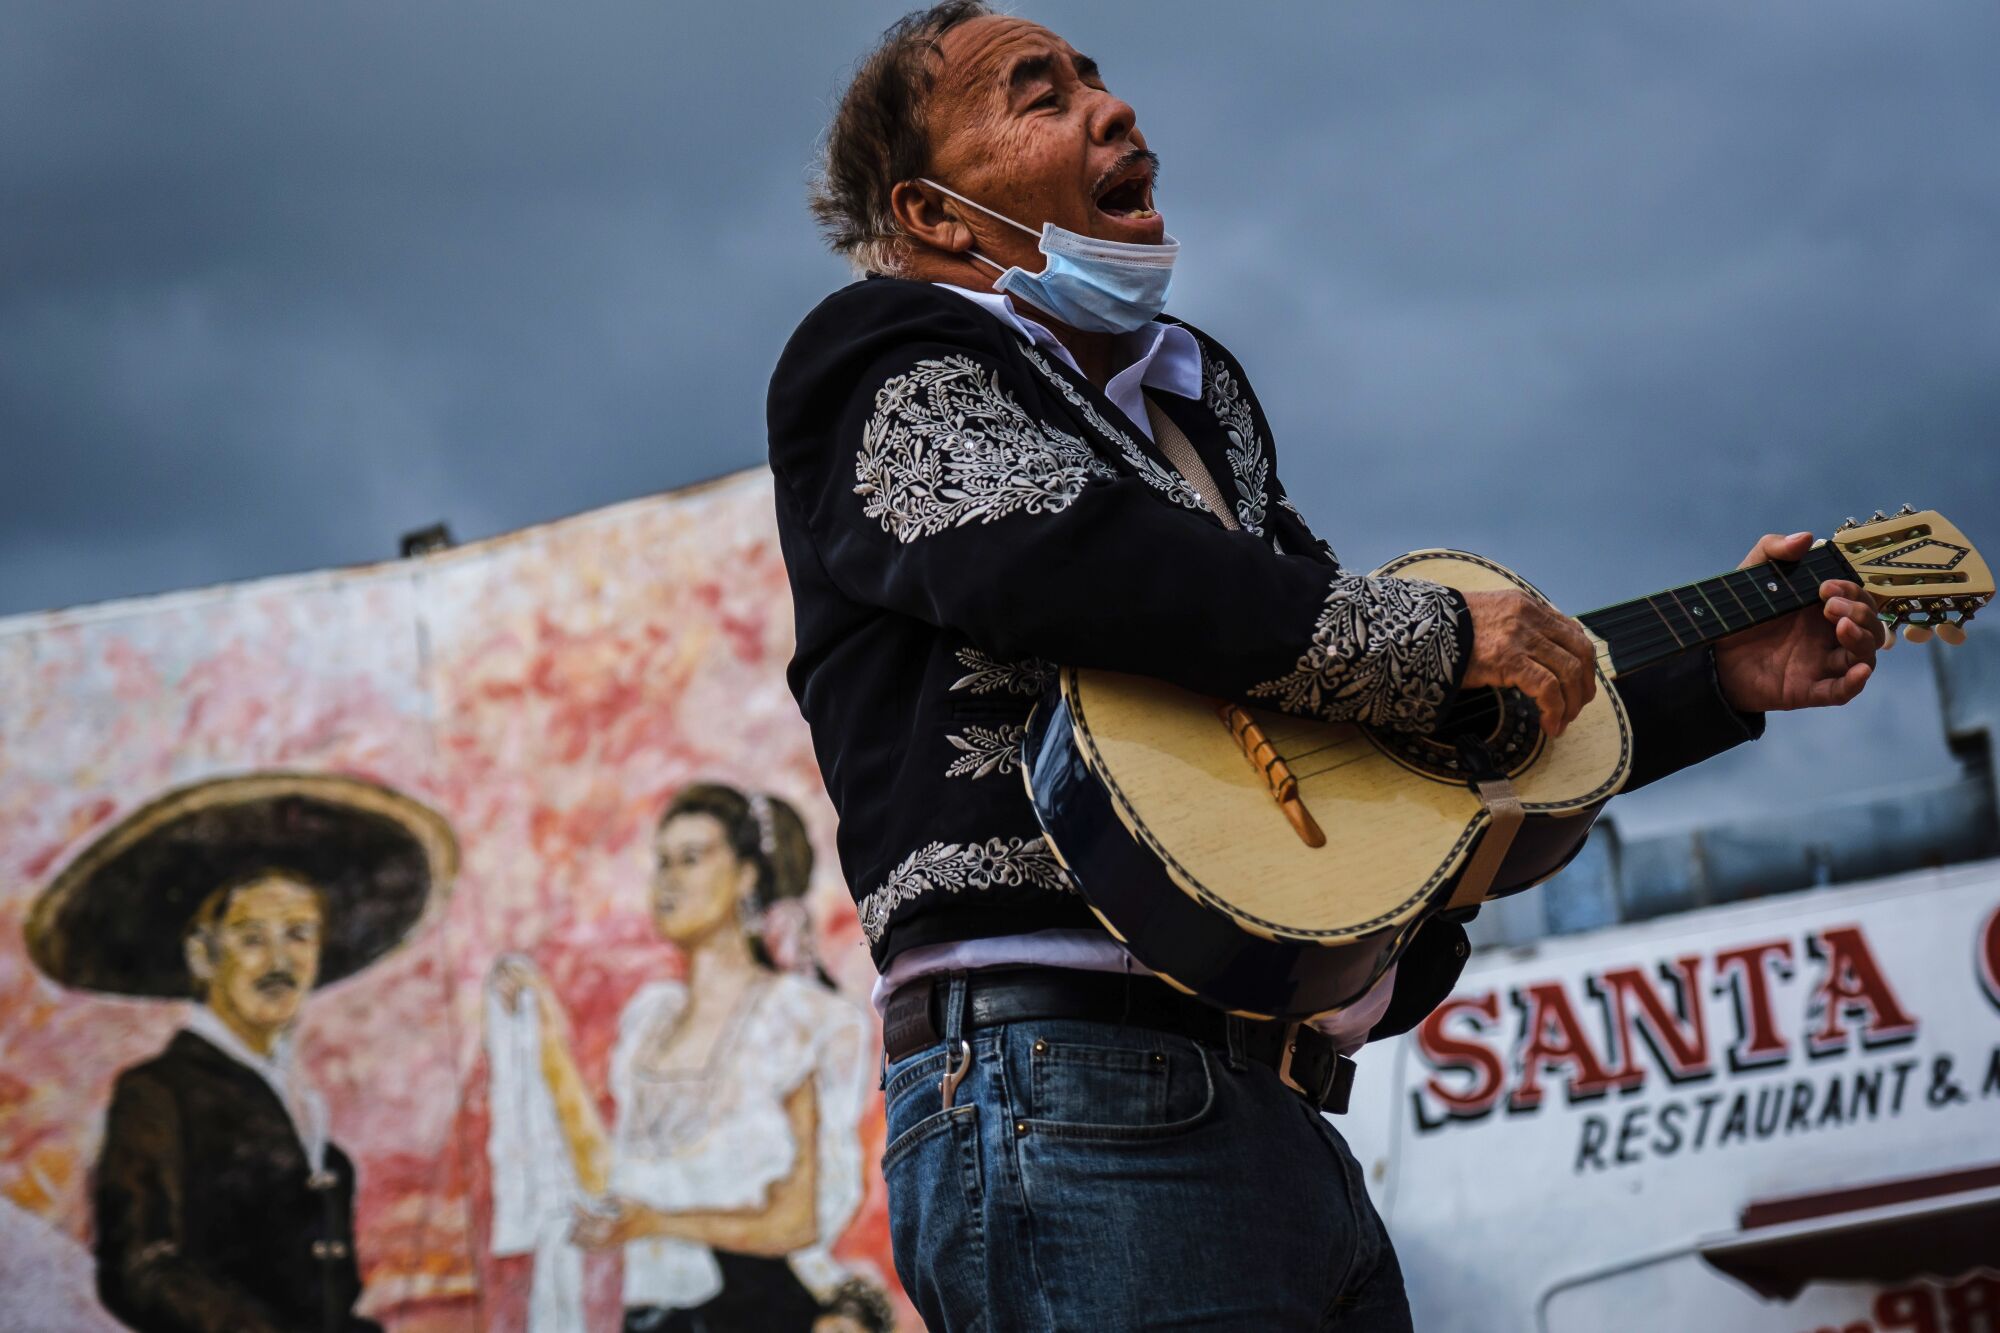 Santos Monge serenades amid an empty space with his vihuela (a small guitar) as he awaits work as a musician at Mariachi Plaza in Los Angeles.